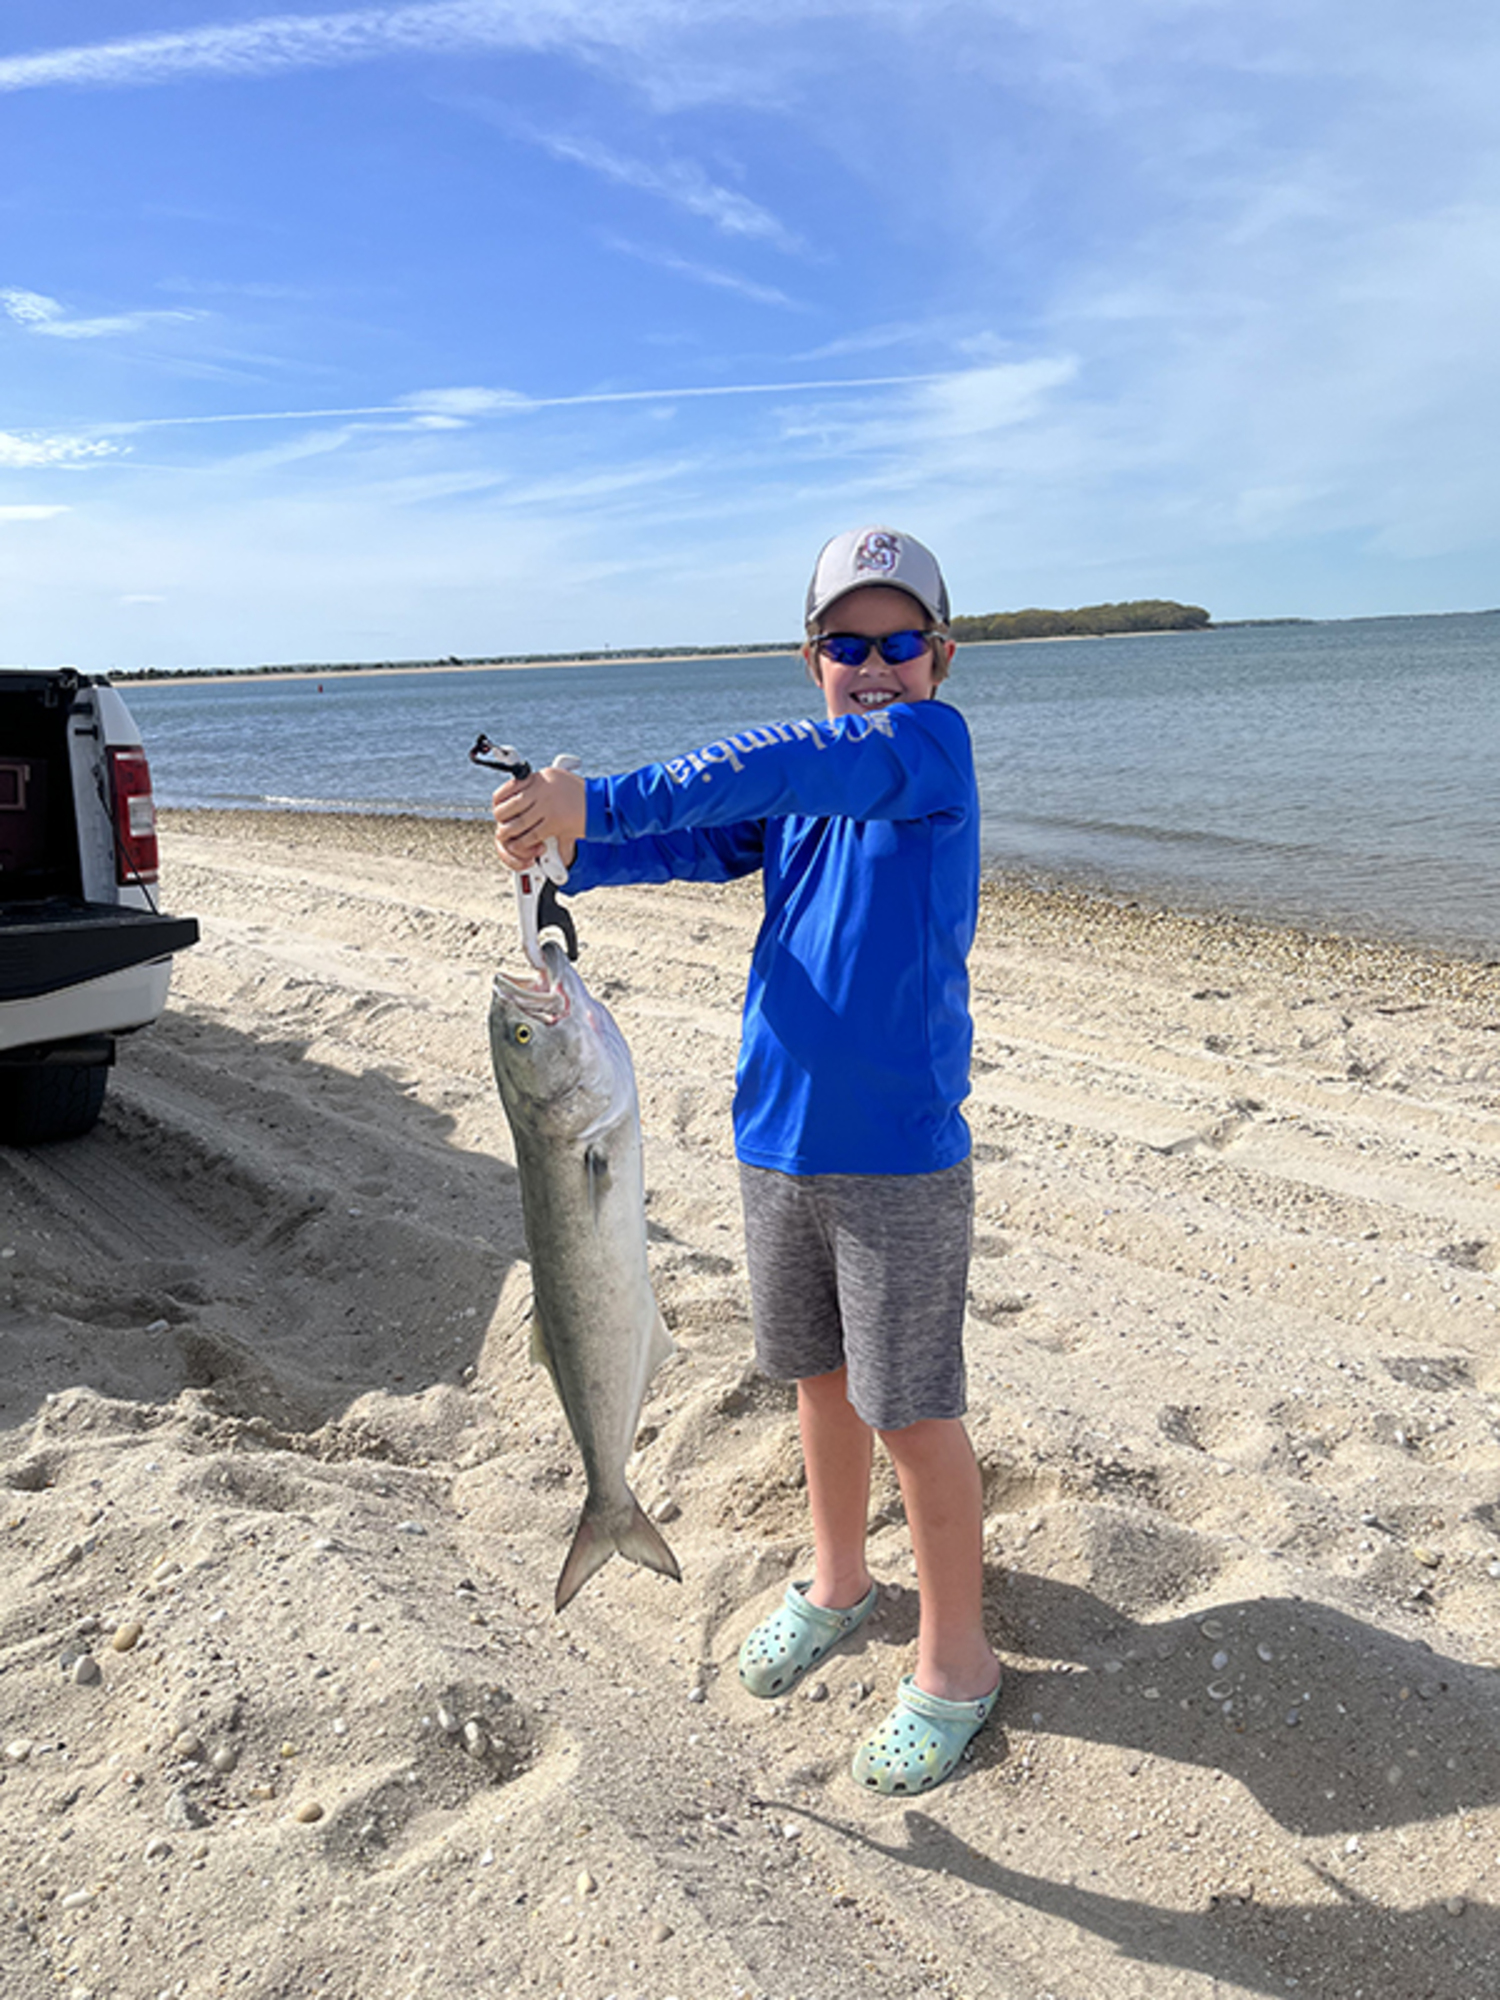 Thomas Capalbo hooked and beached this gorilla bluefish off the beach in Sag Harbor last week.